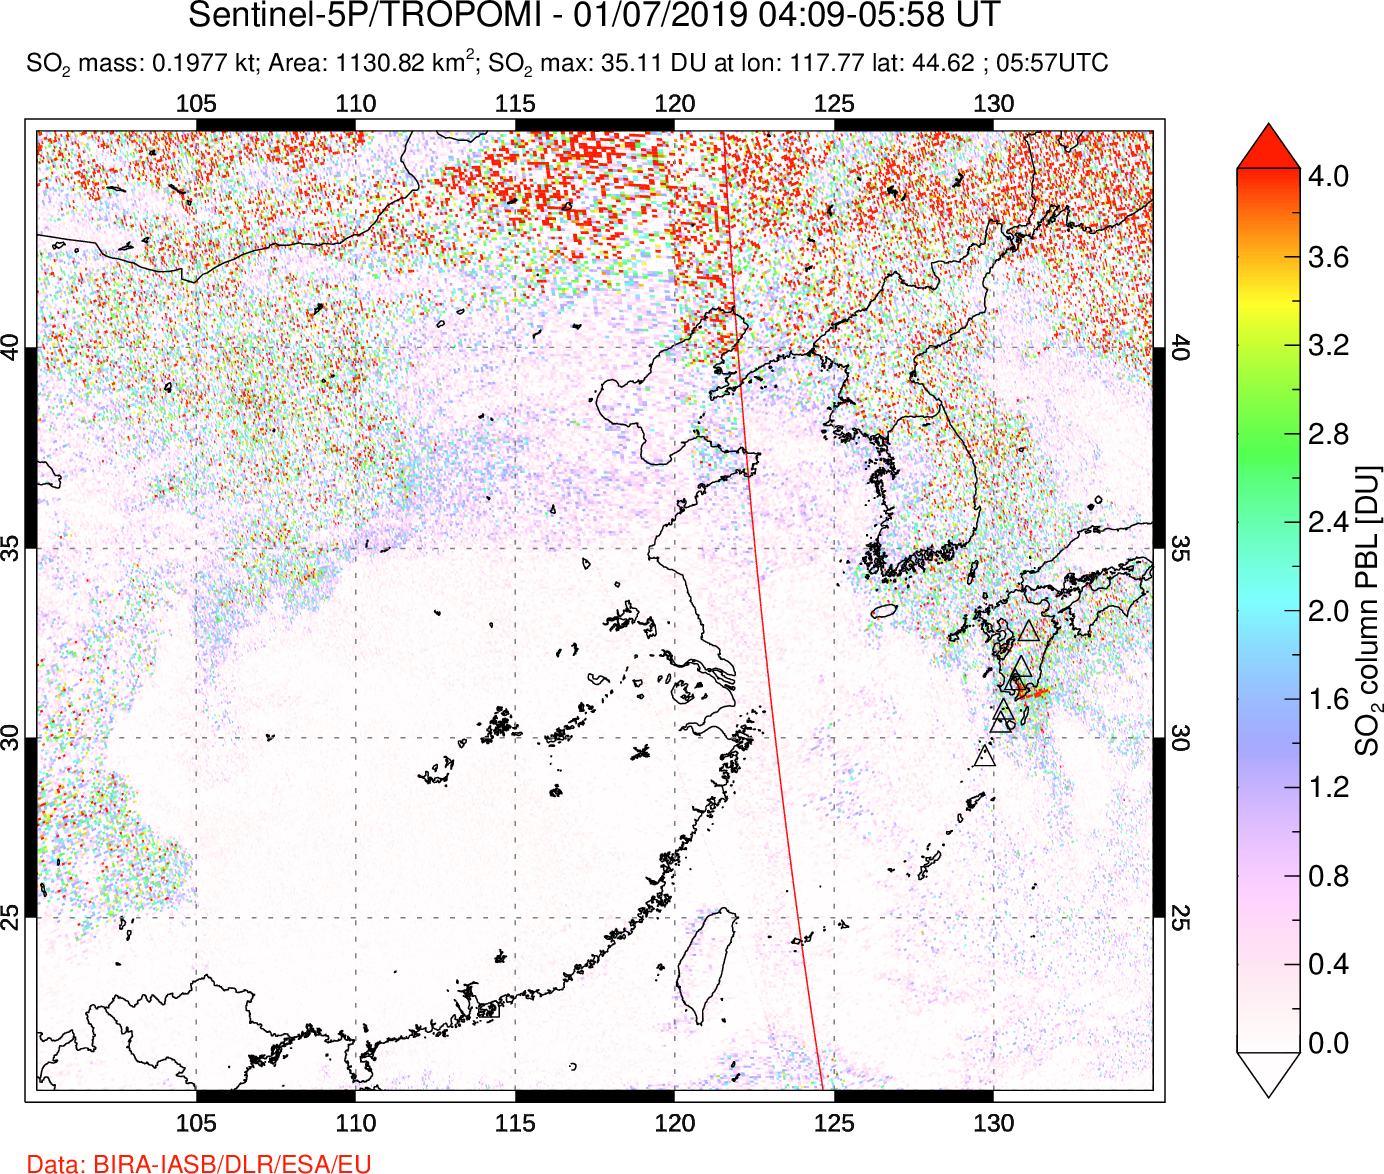 A sulfur dioxide image over Eastern China on Jan 07, 2019.